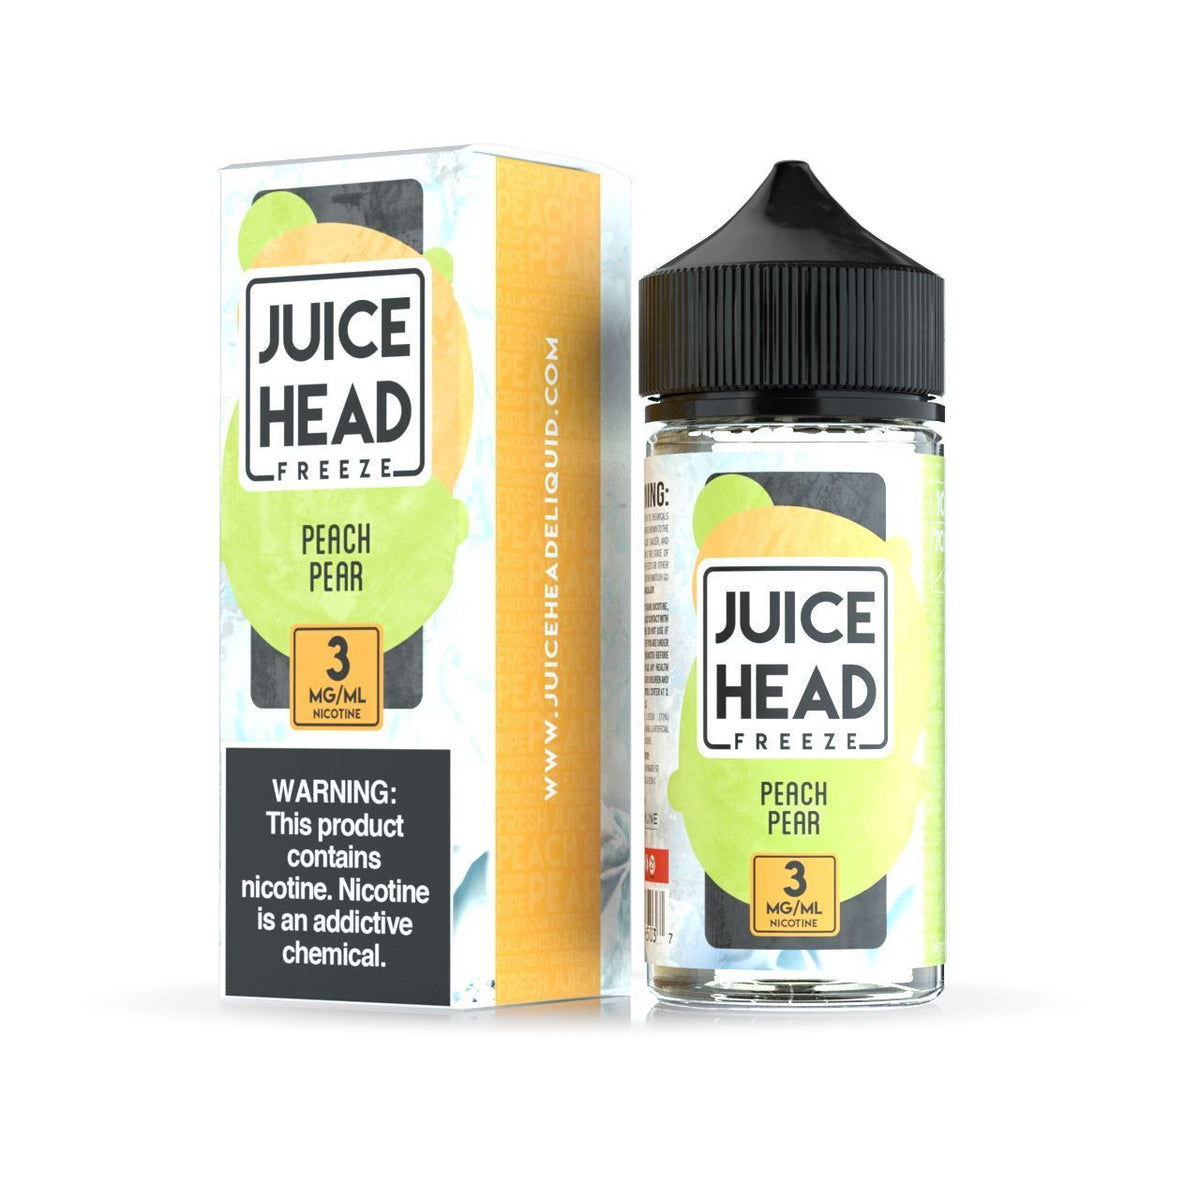 Peach Pear Freeze by Juice Head Series 100ml with Packaging